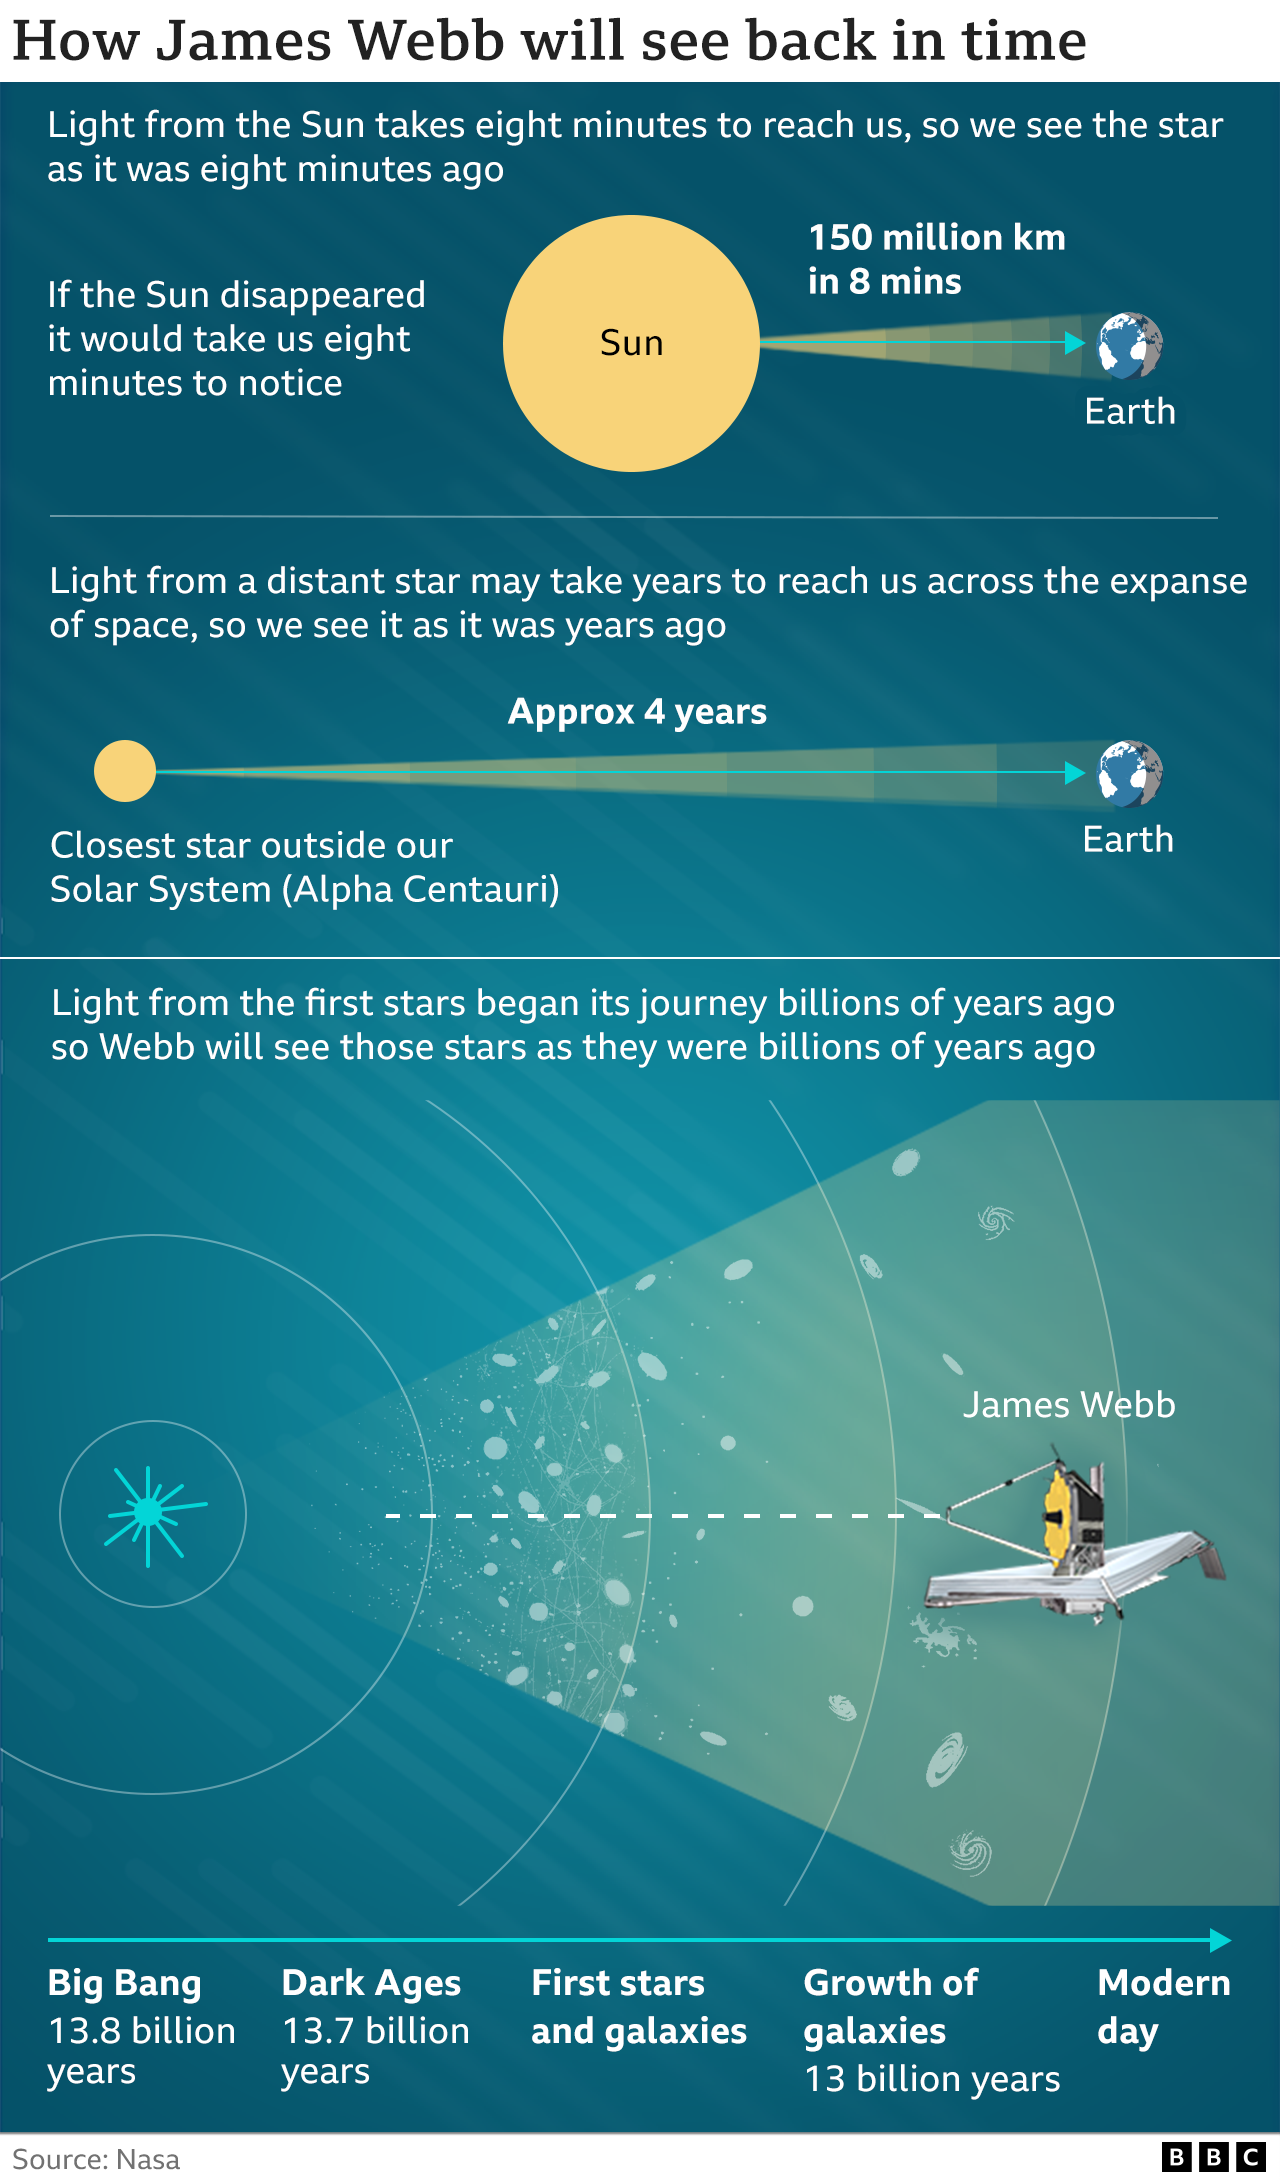 How telescope will see back in time